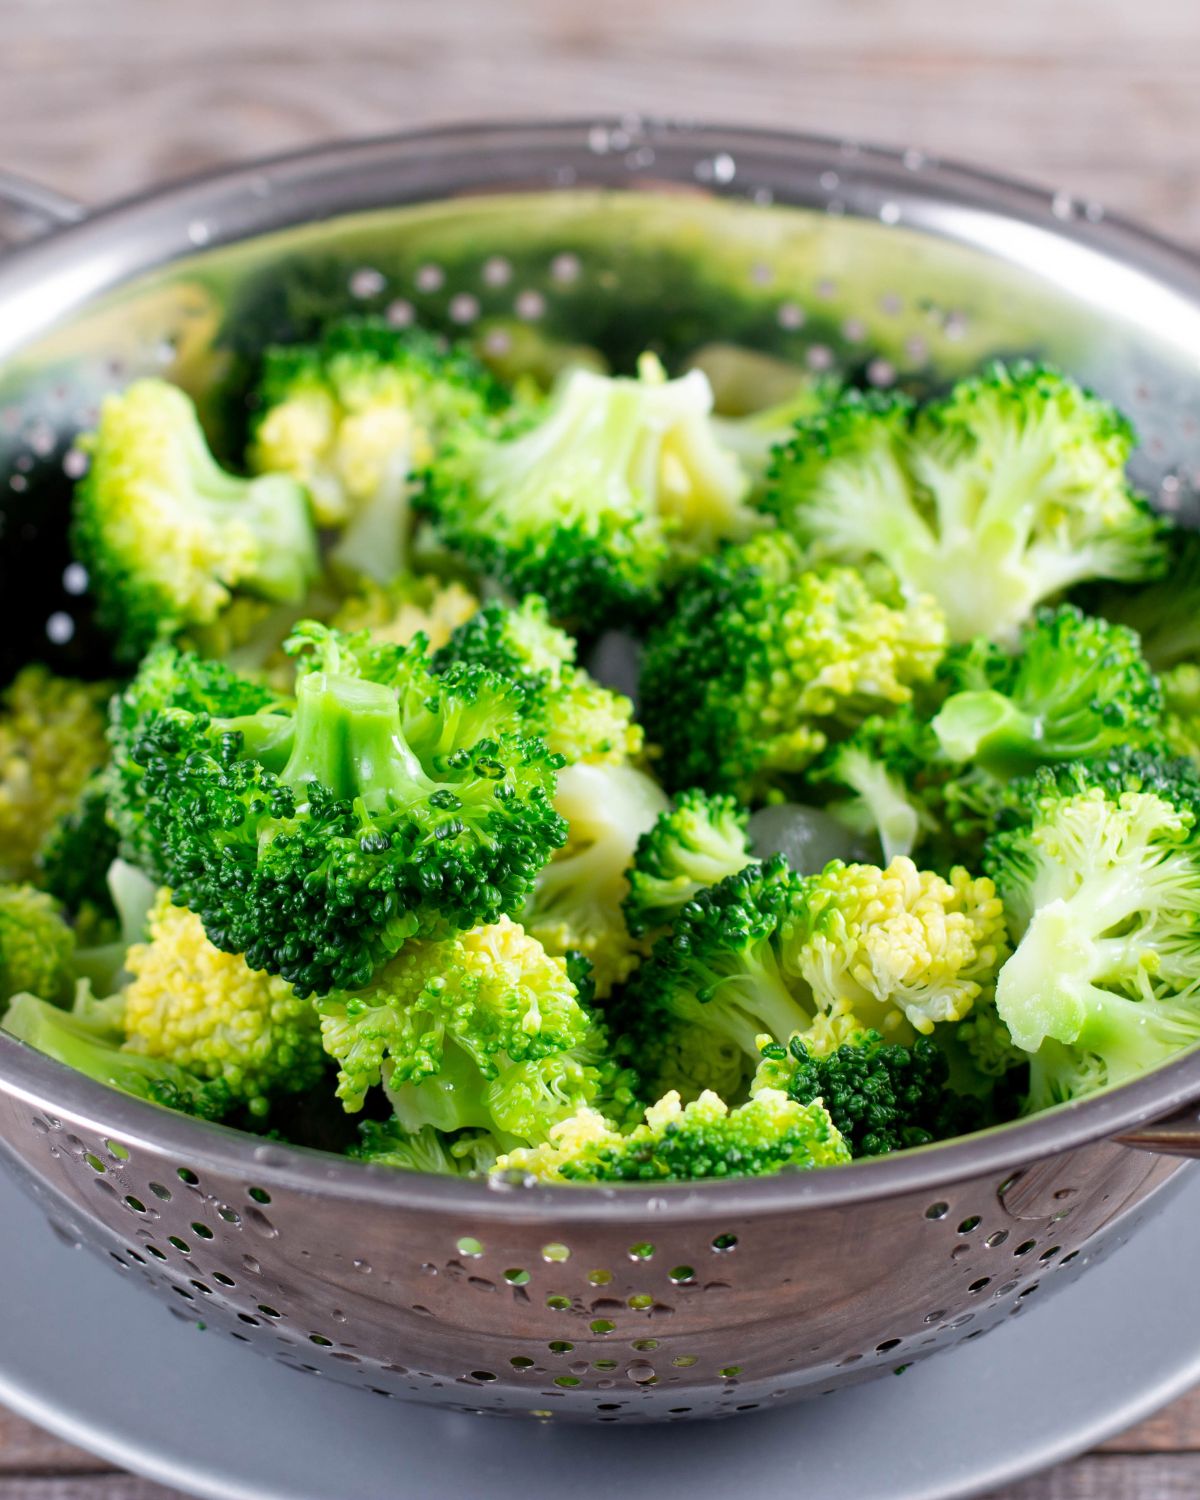 A colander full of cooked broccoli.